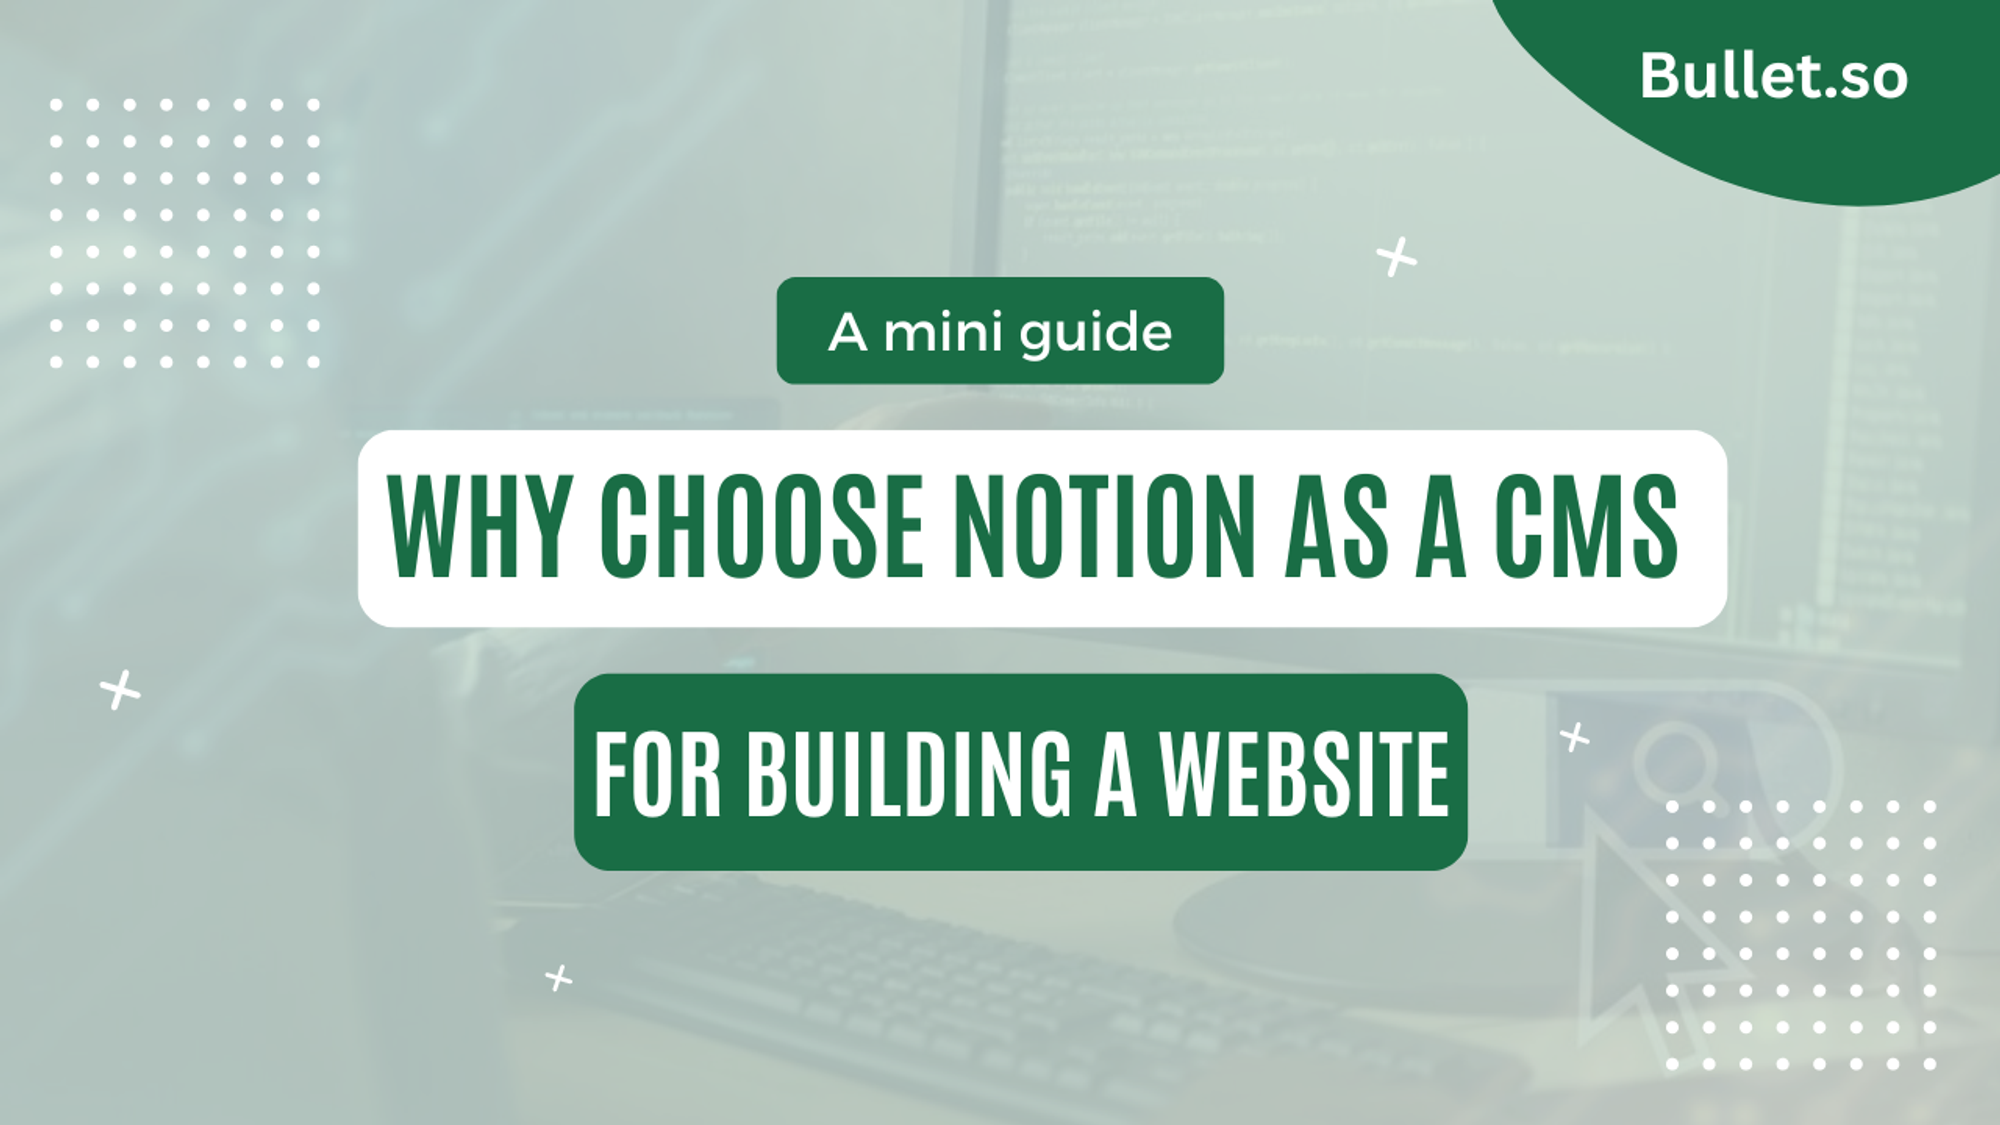 Why choose Notion as a CMS for building a website